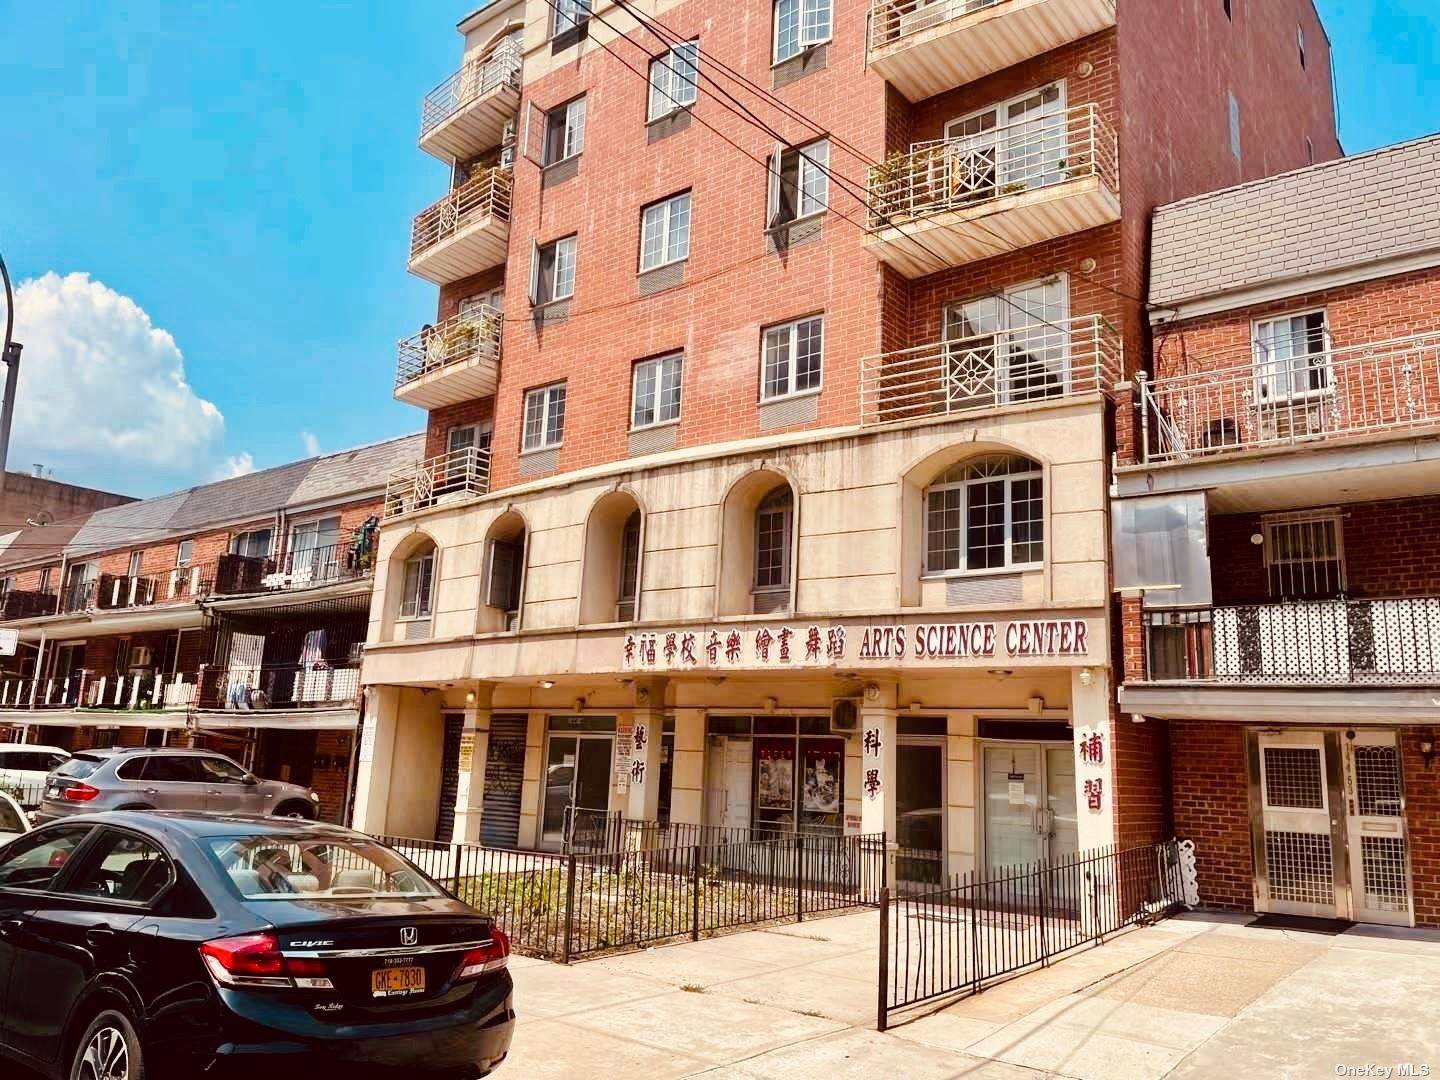 Great location in the heart of Flushing, Community Facility condo great for medical office, religious, day care, adult care center, piano or dancing studio, etc.